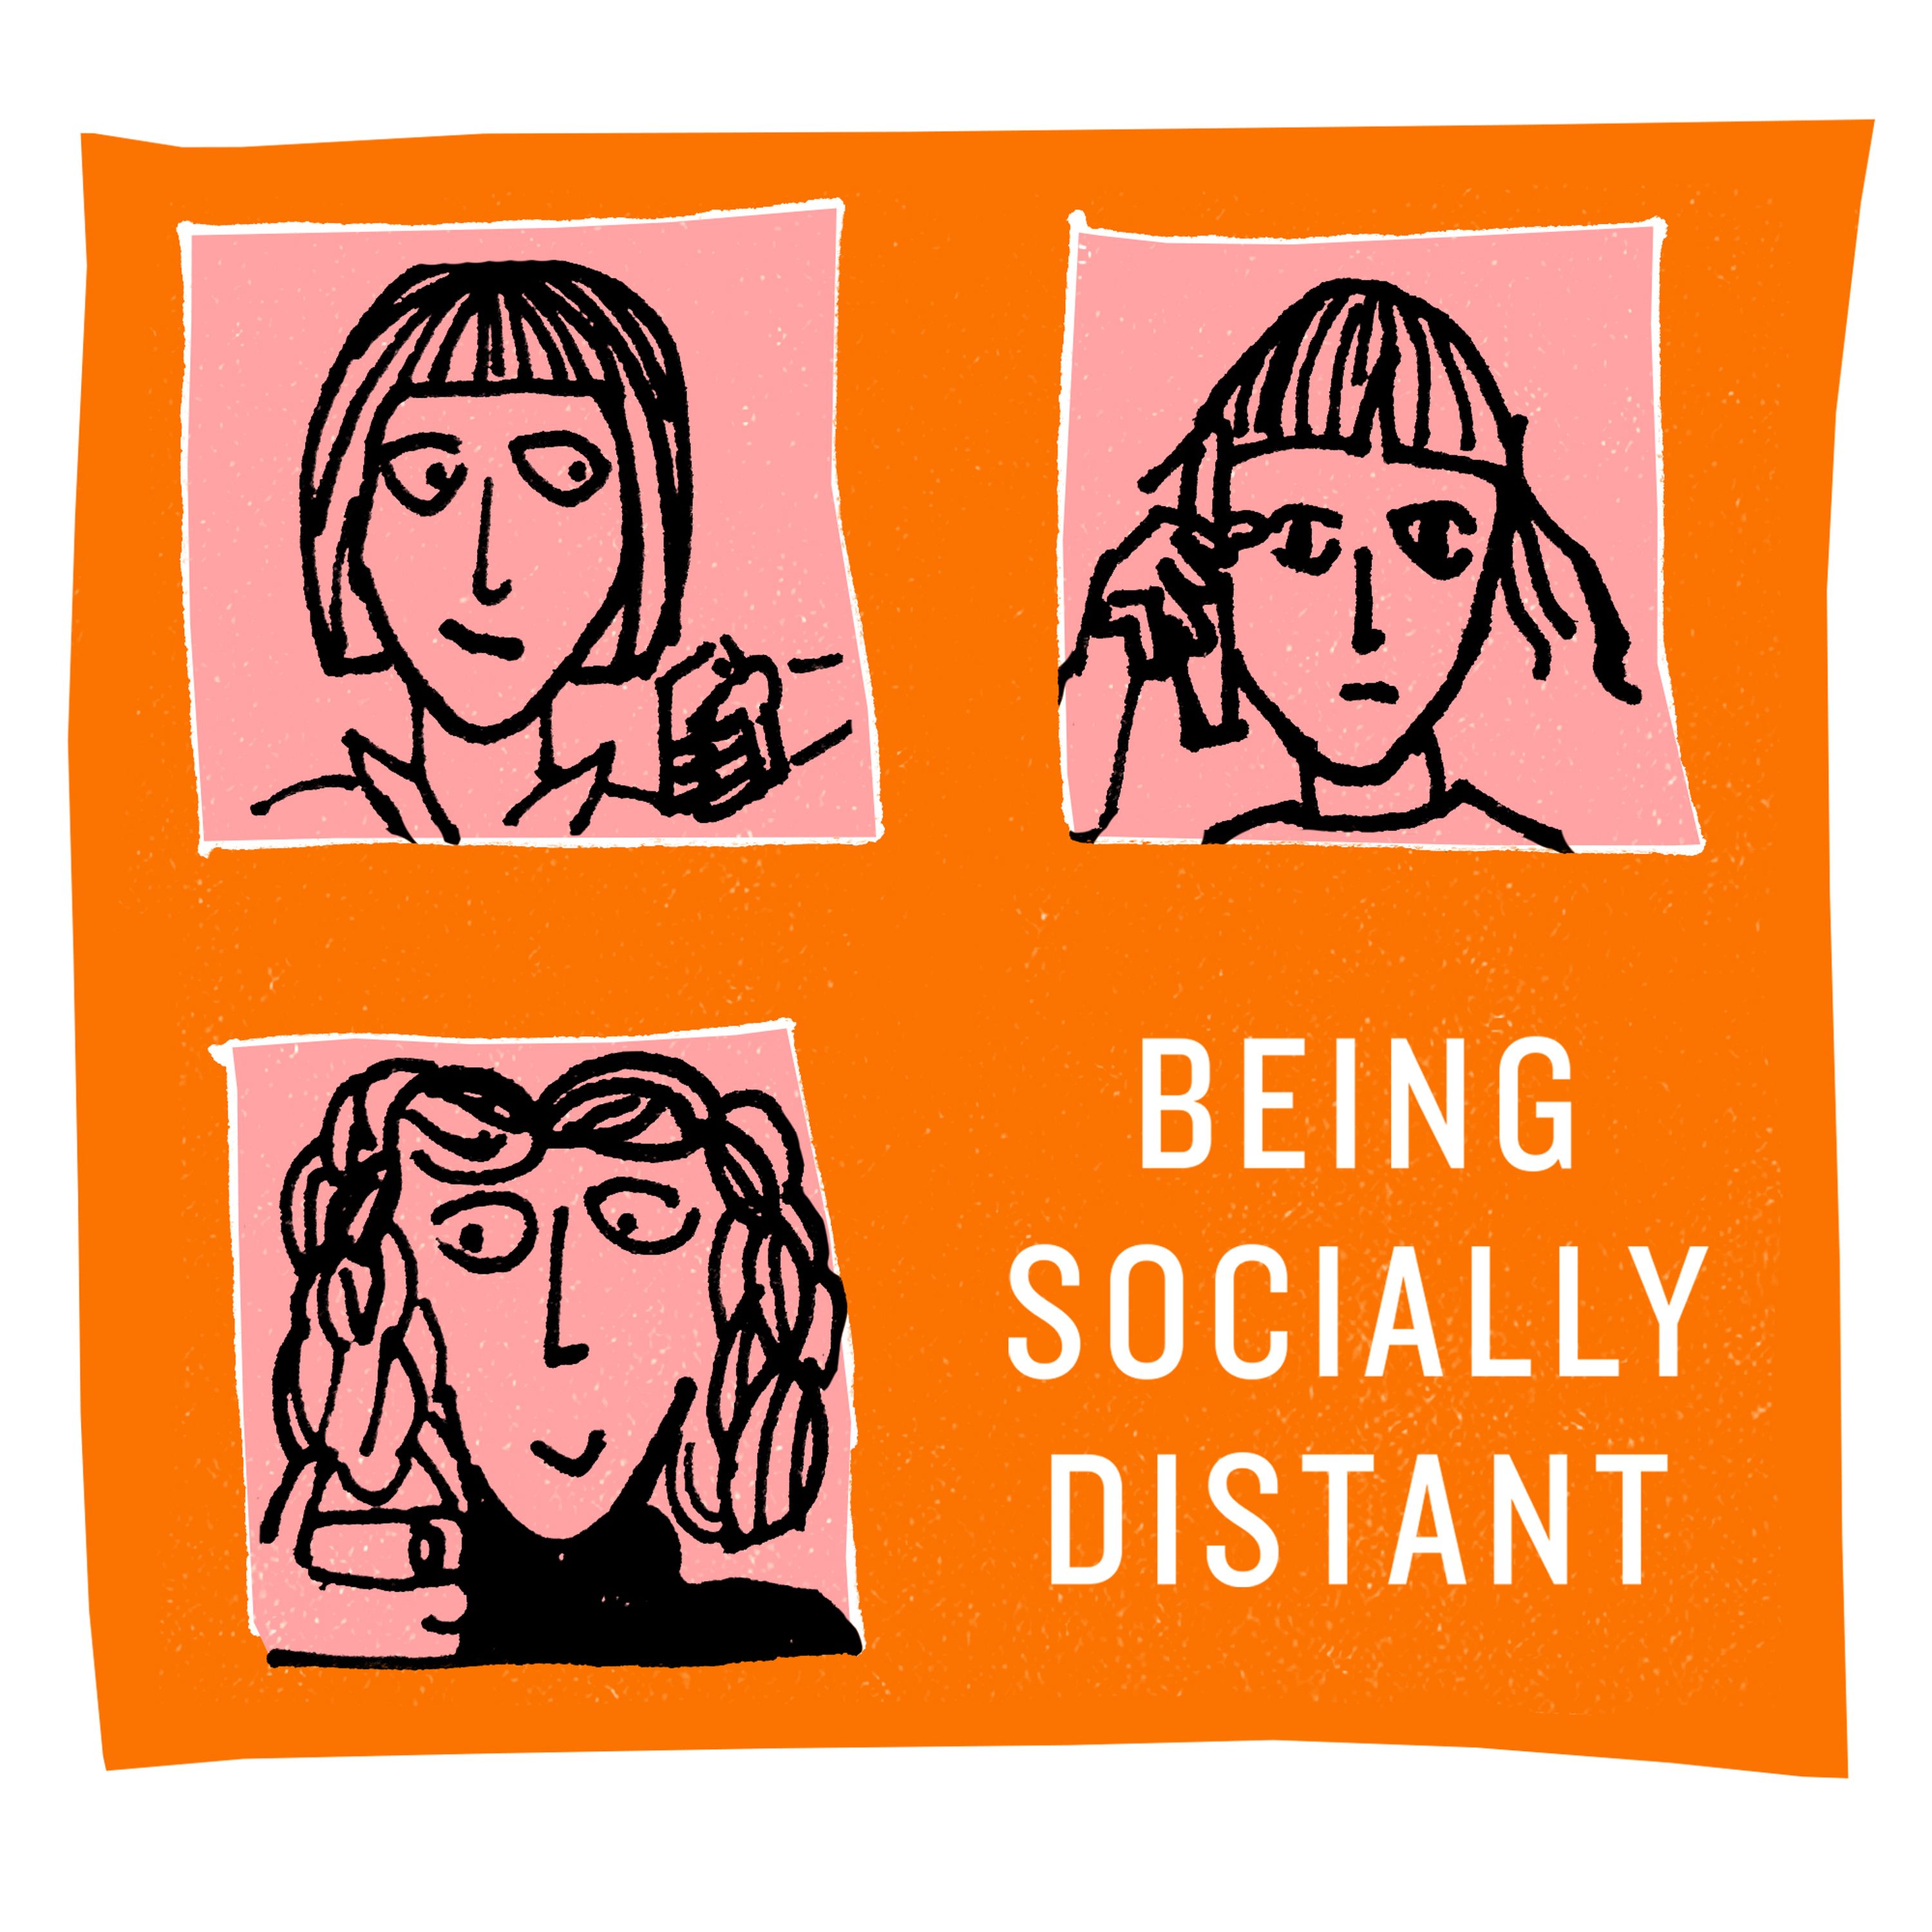 Trailer for our new podcast - Being Socially Distant